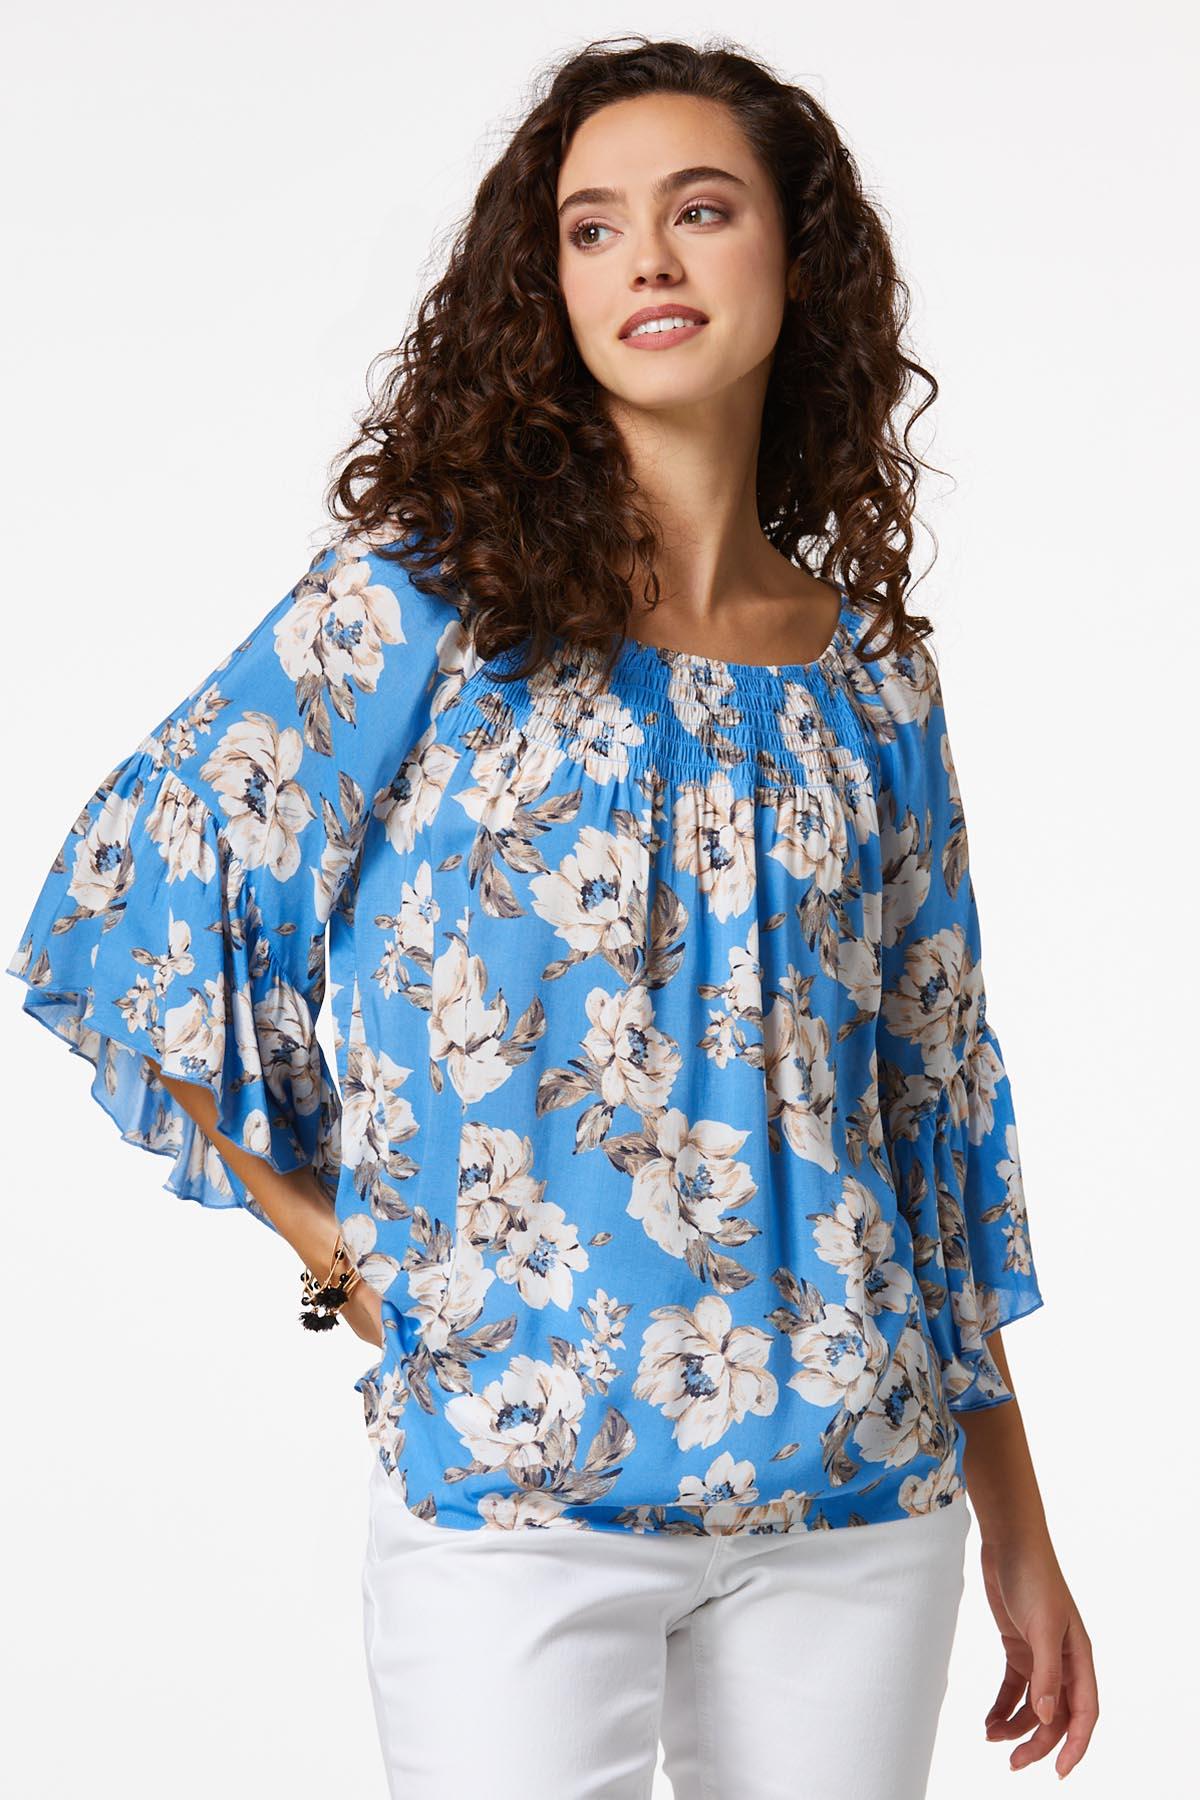 Cato Top Fashions Blue Poet | Floral Cato